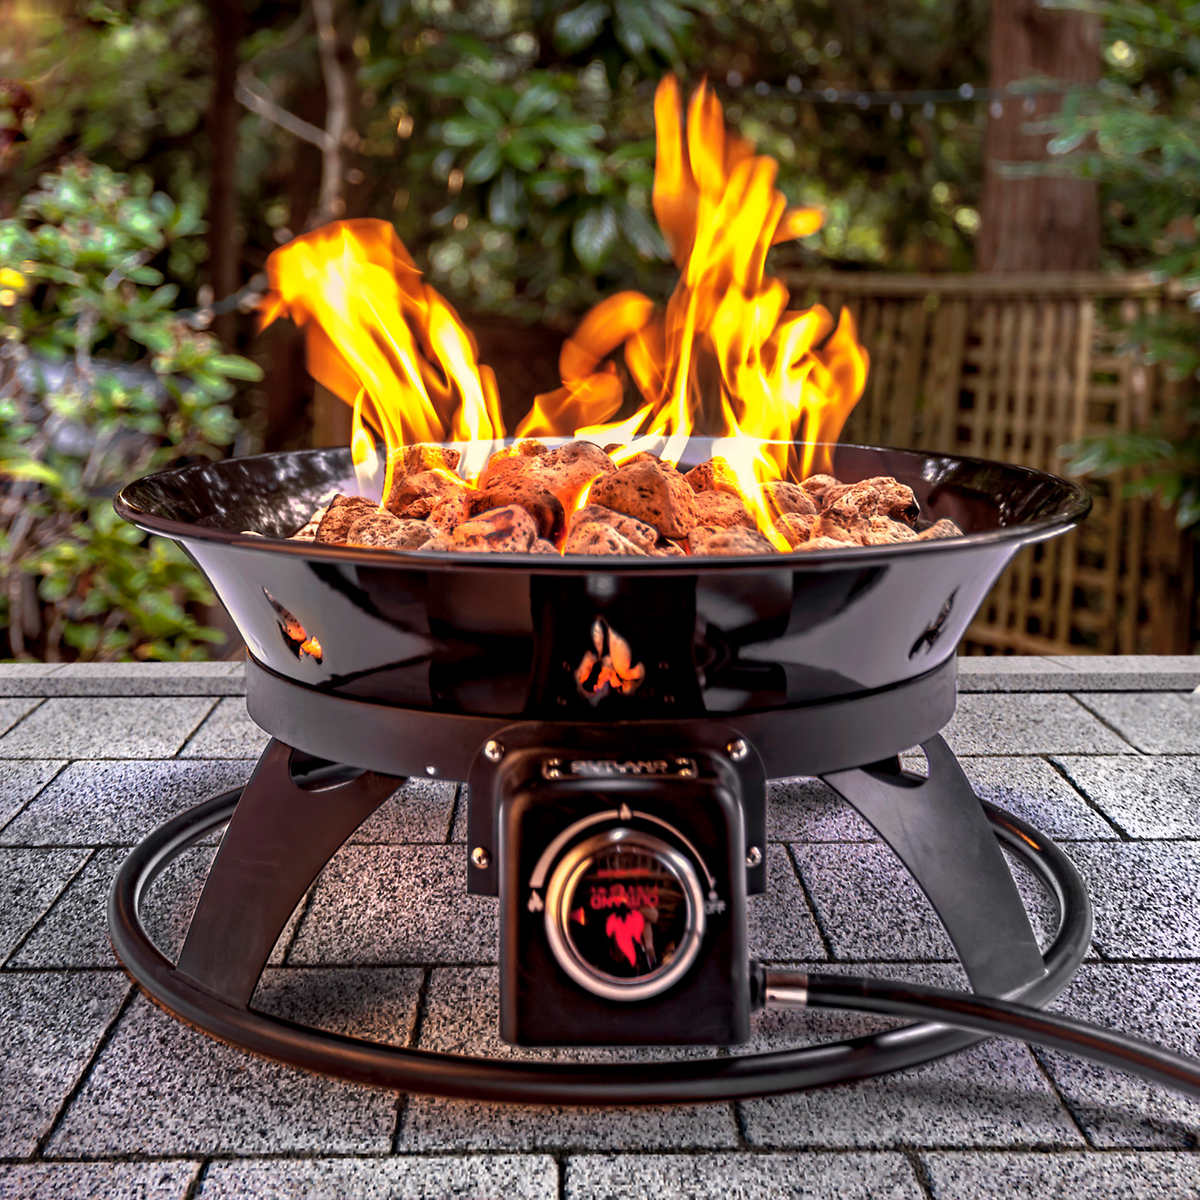 Outland Firebowl Outdoor Firepit Costco, Are Propane Fire Pits Legal In California